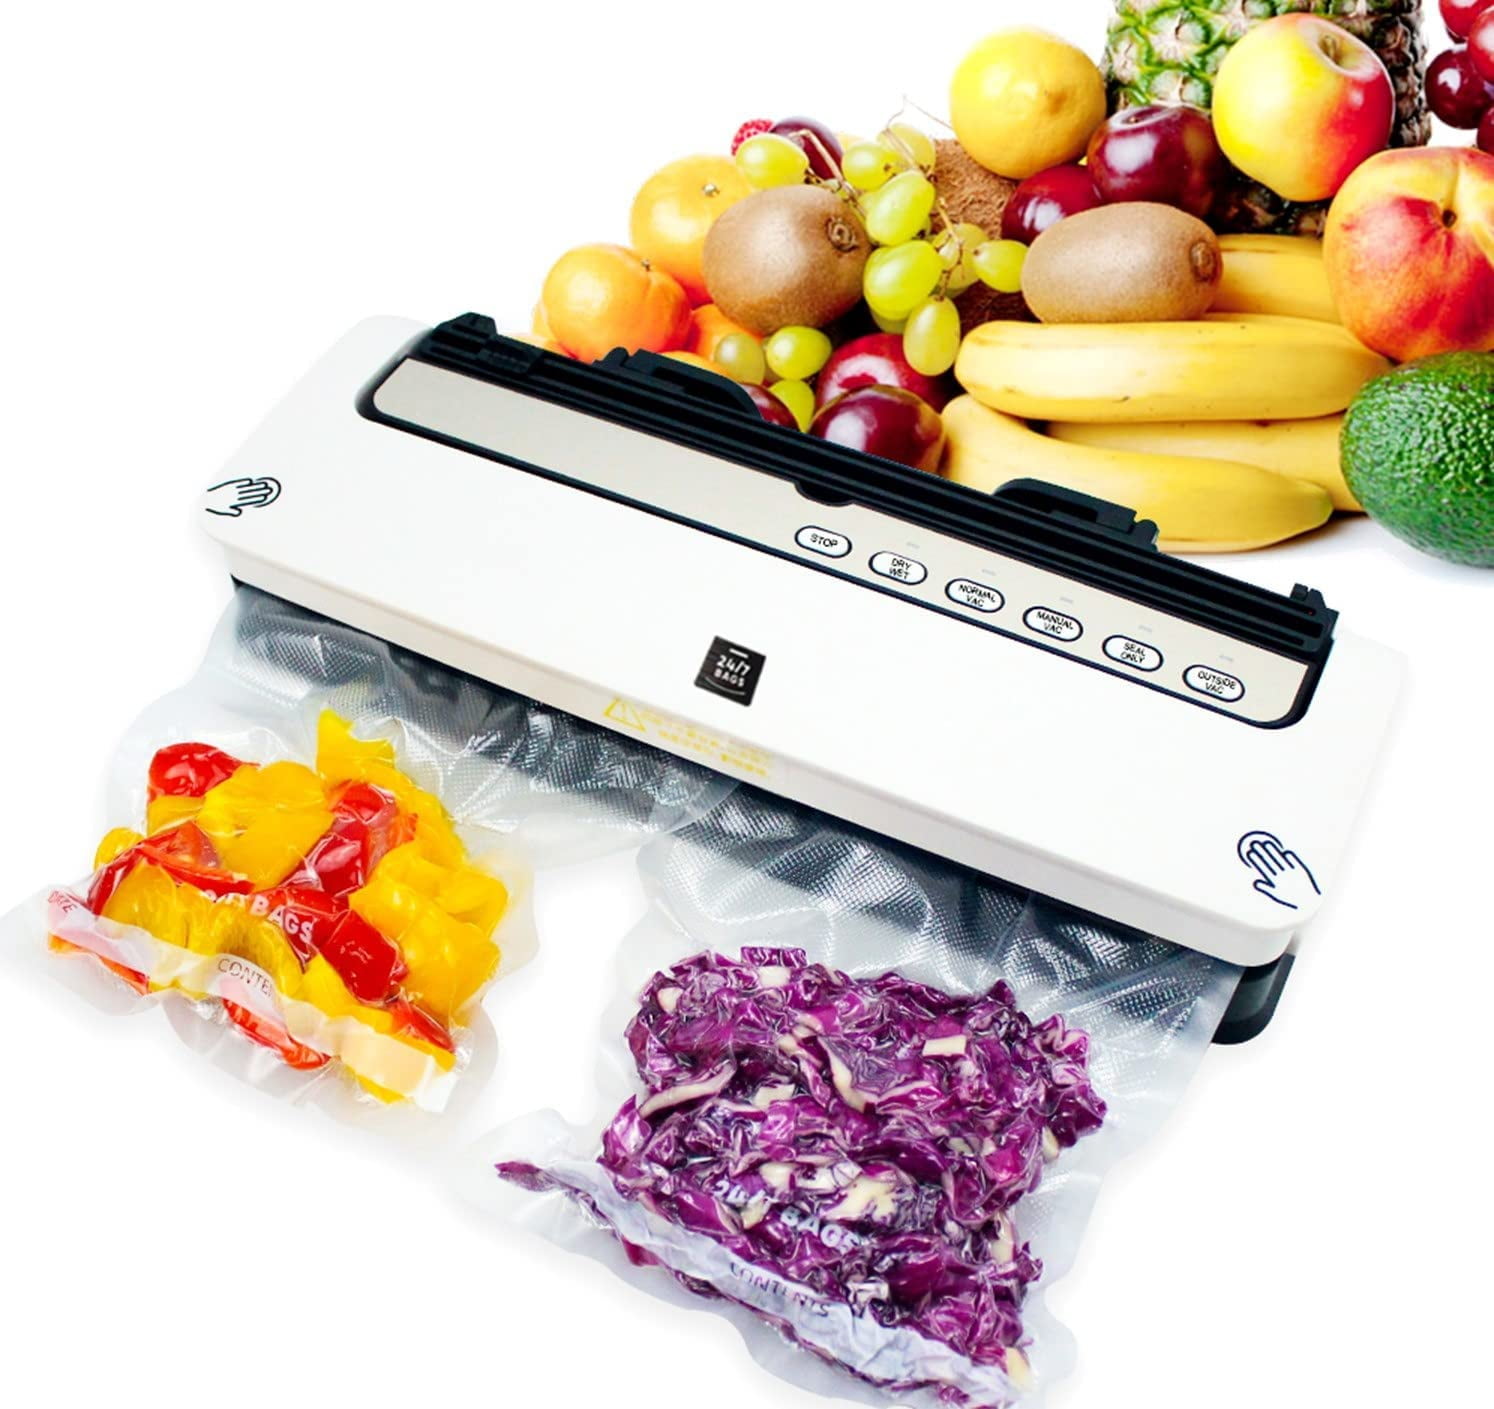 Wevac Vacuum Sealer Machine | Built-in Bag Roll Saver (Up to 50) and Cutter | Double Heat Seal | Dual Pump | Auto Lock | Commercial Grade | Ideal for